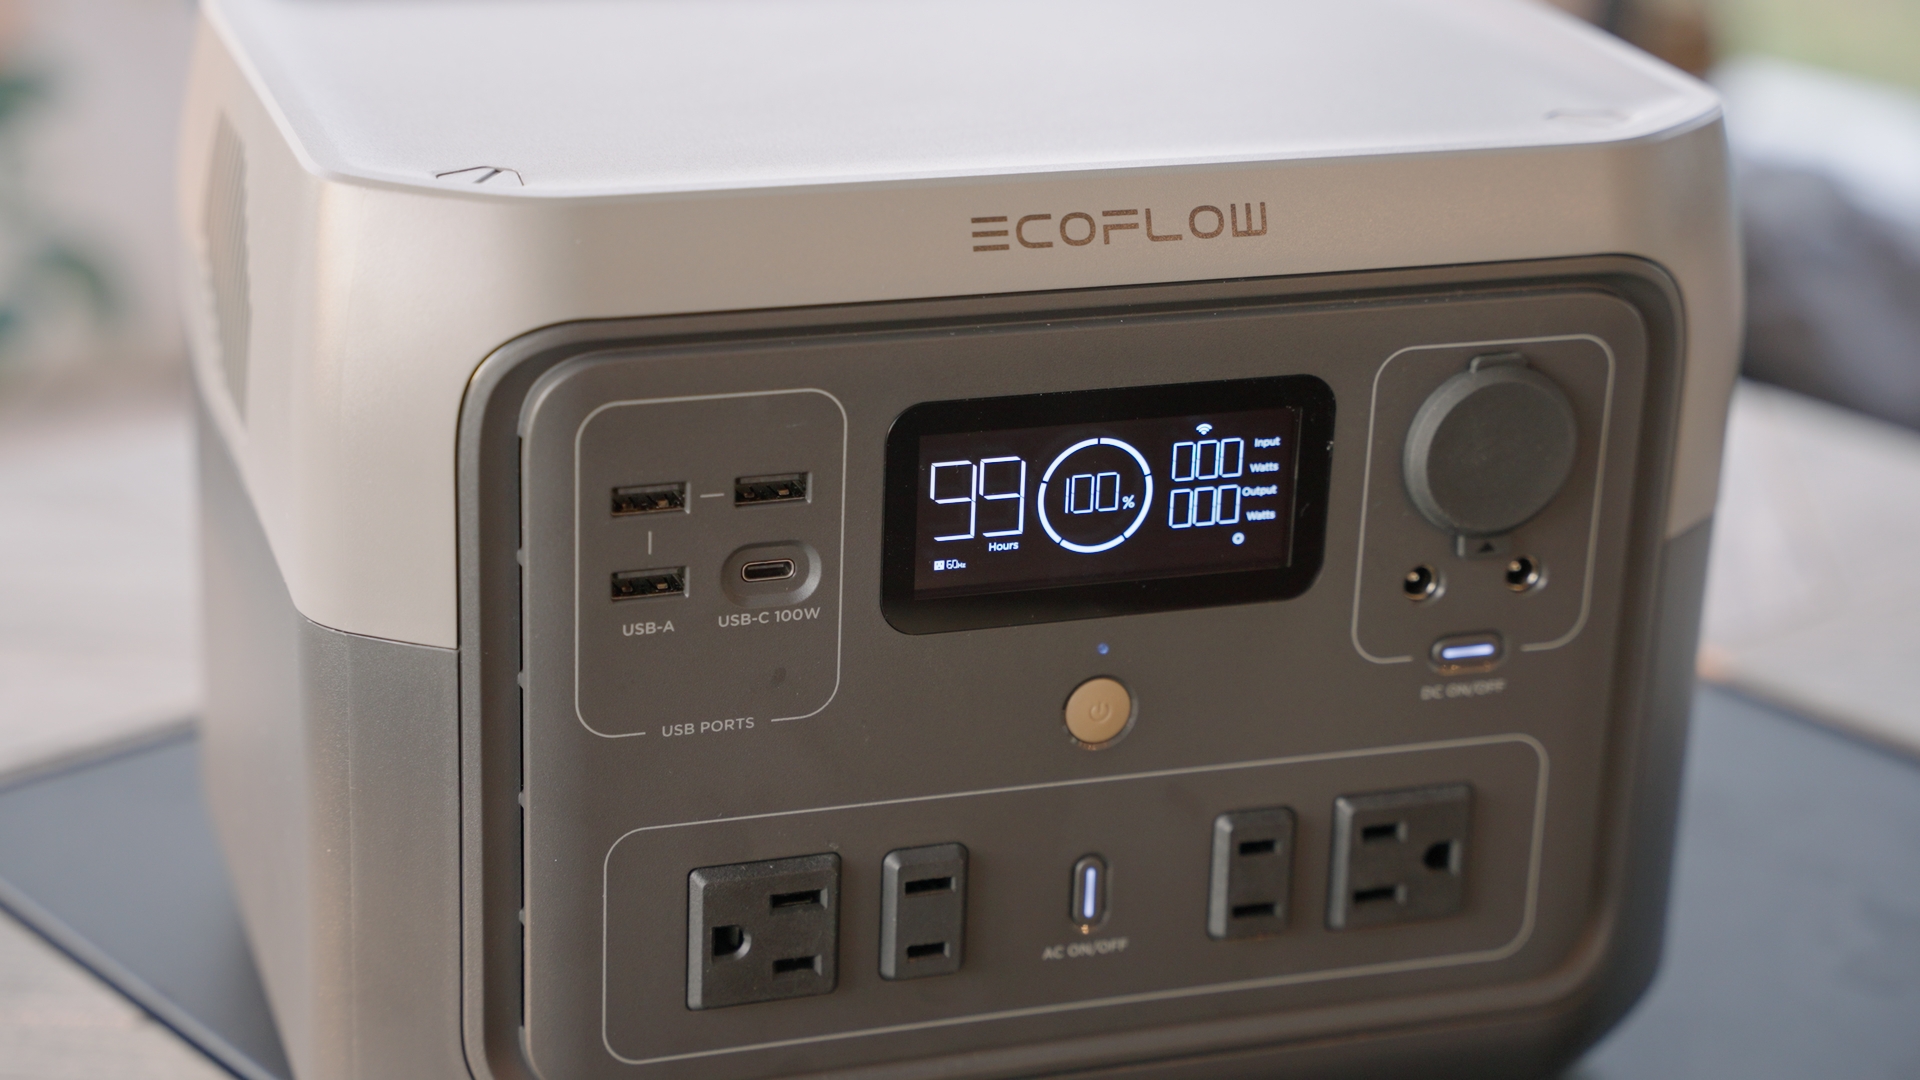 Ecoflow River 2 Max review: All-in-one power station for creators on the go